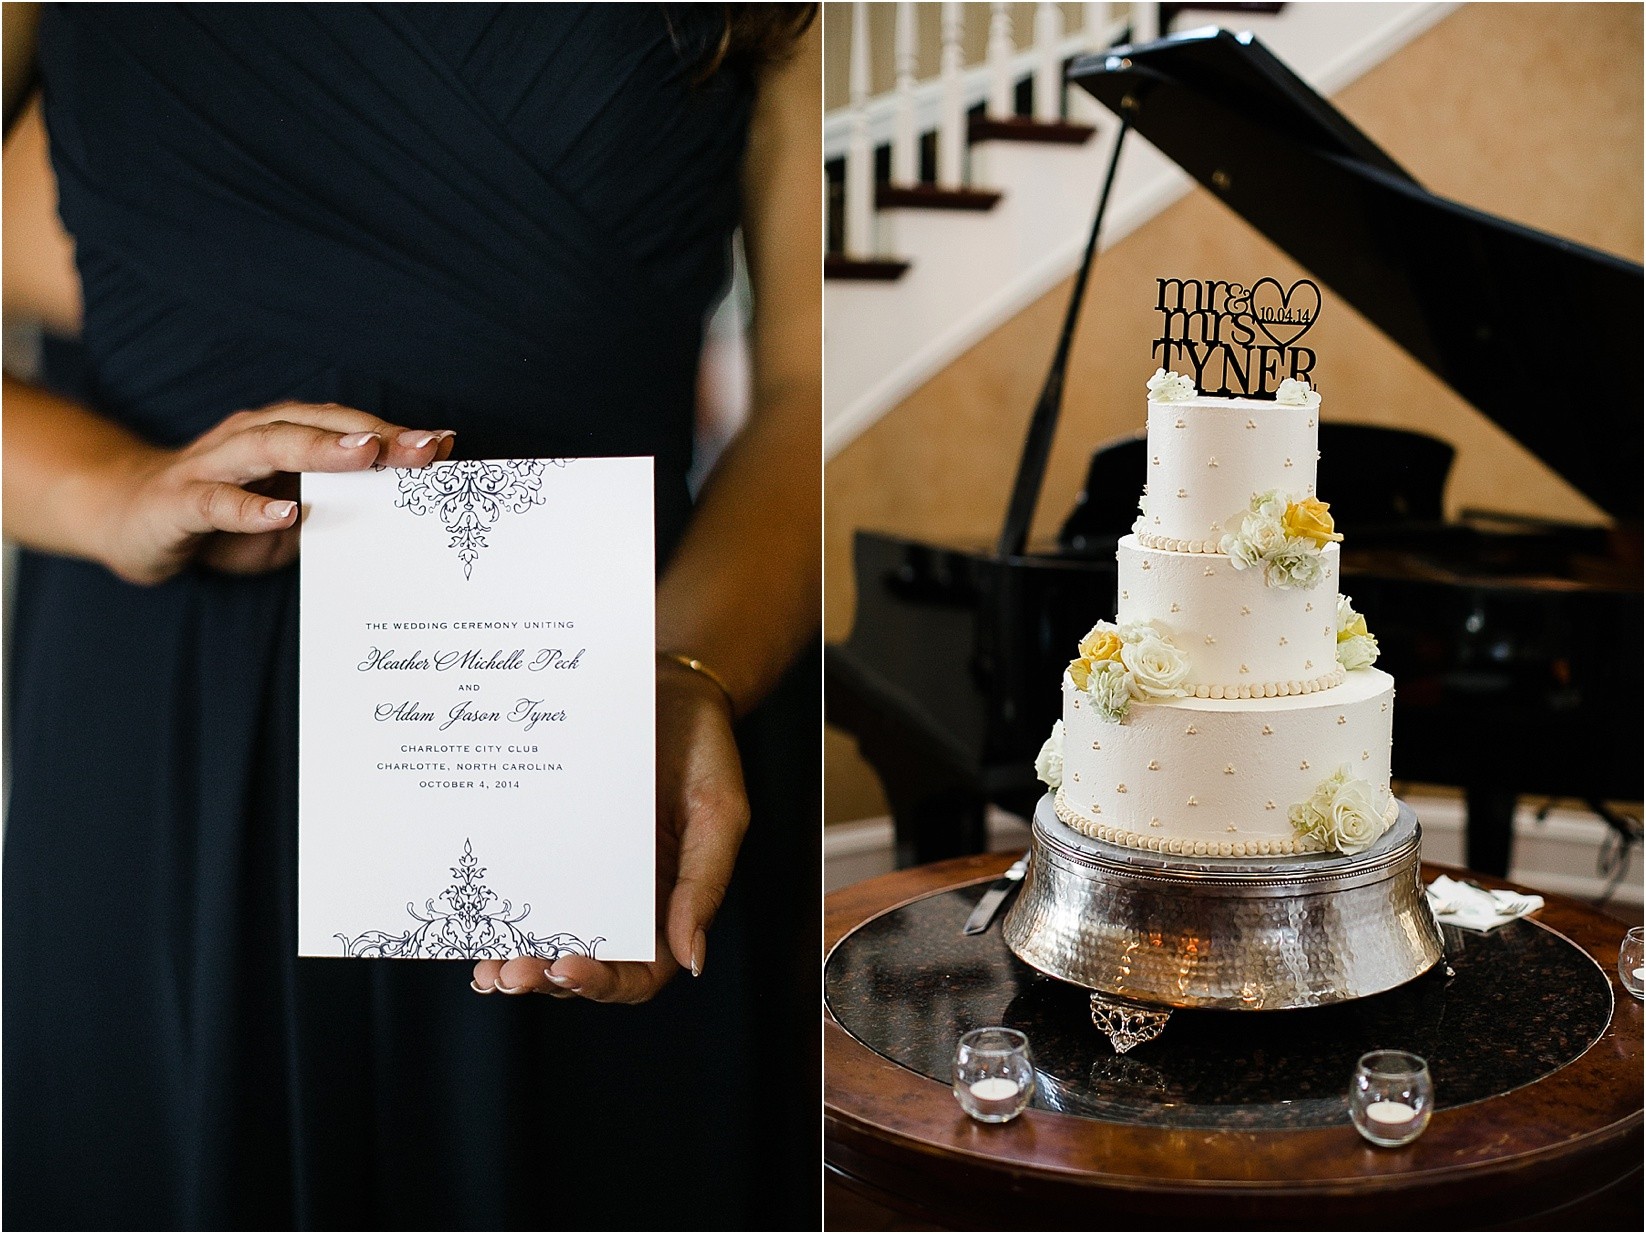 the cake and the wedding brochure during the Charlotte City Club wedding in charlotte North Carolina